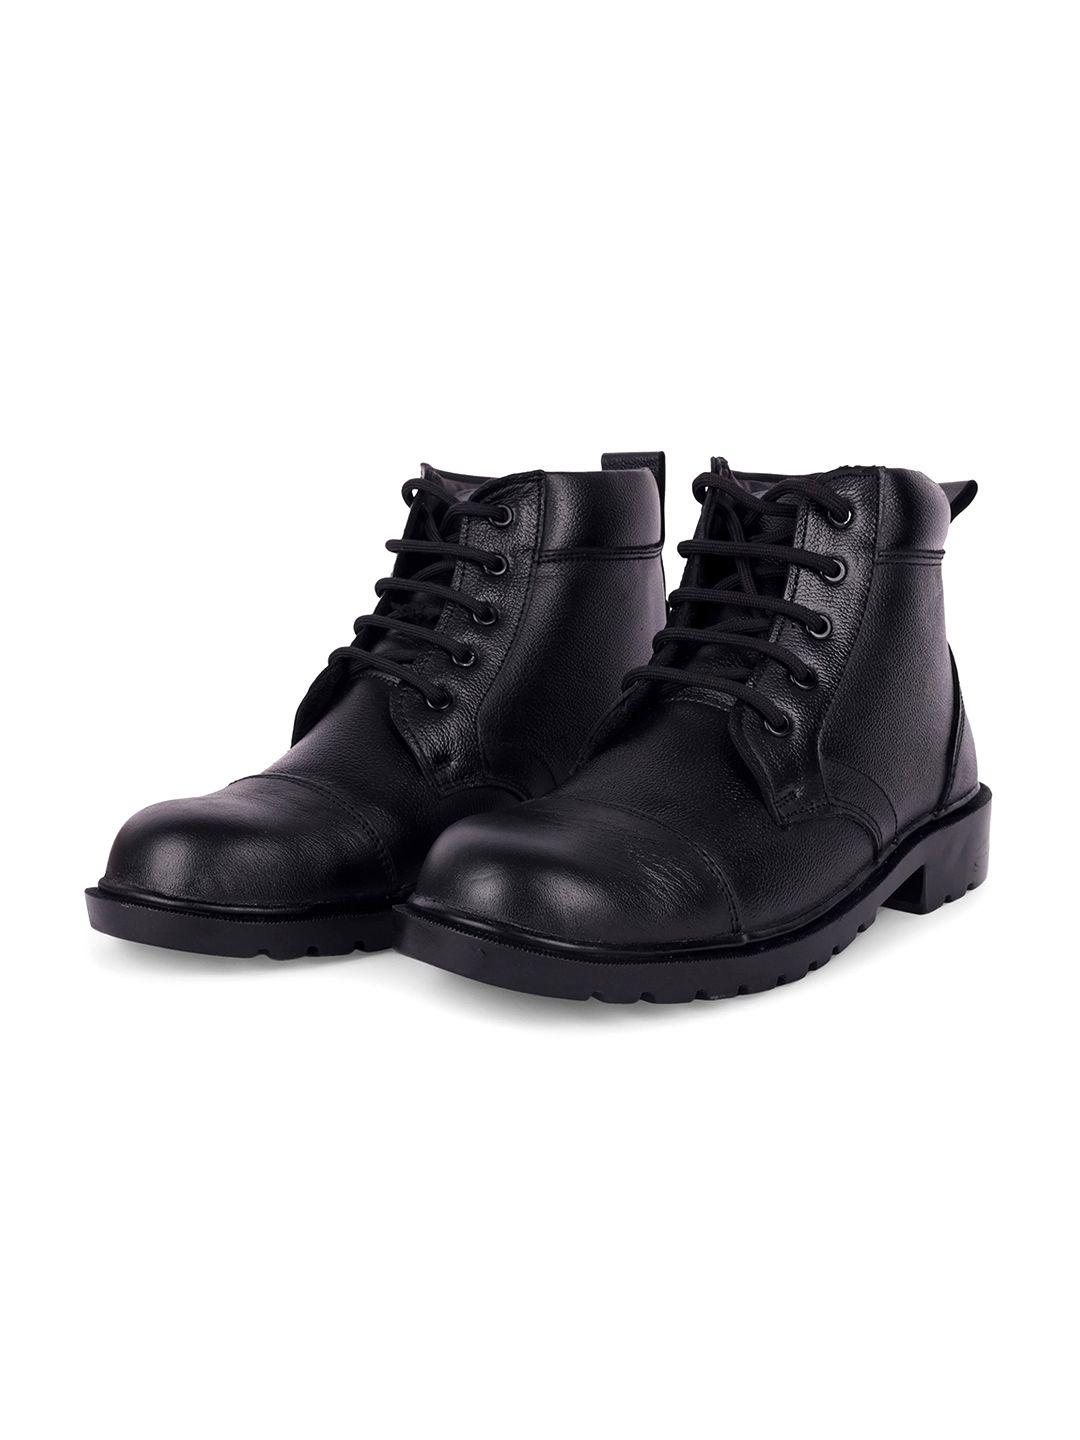 leo's fitness shoes men textured leather boots